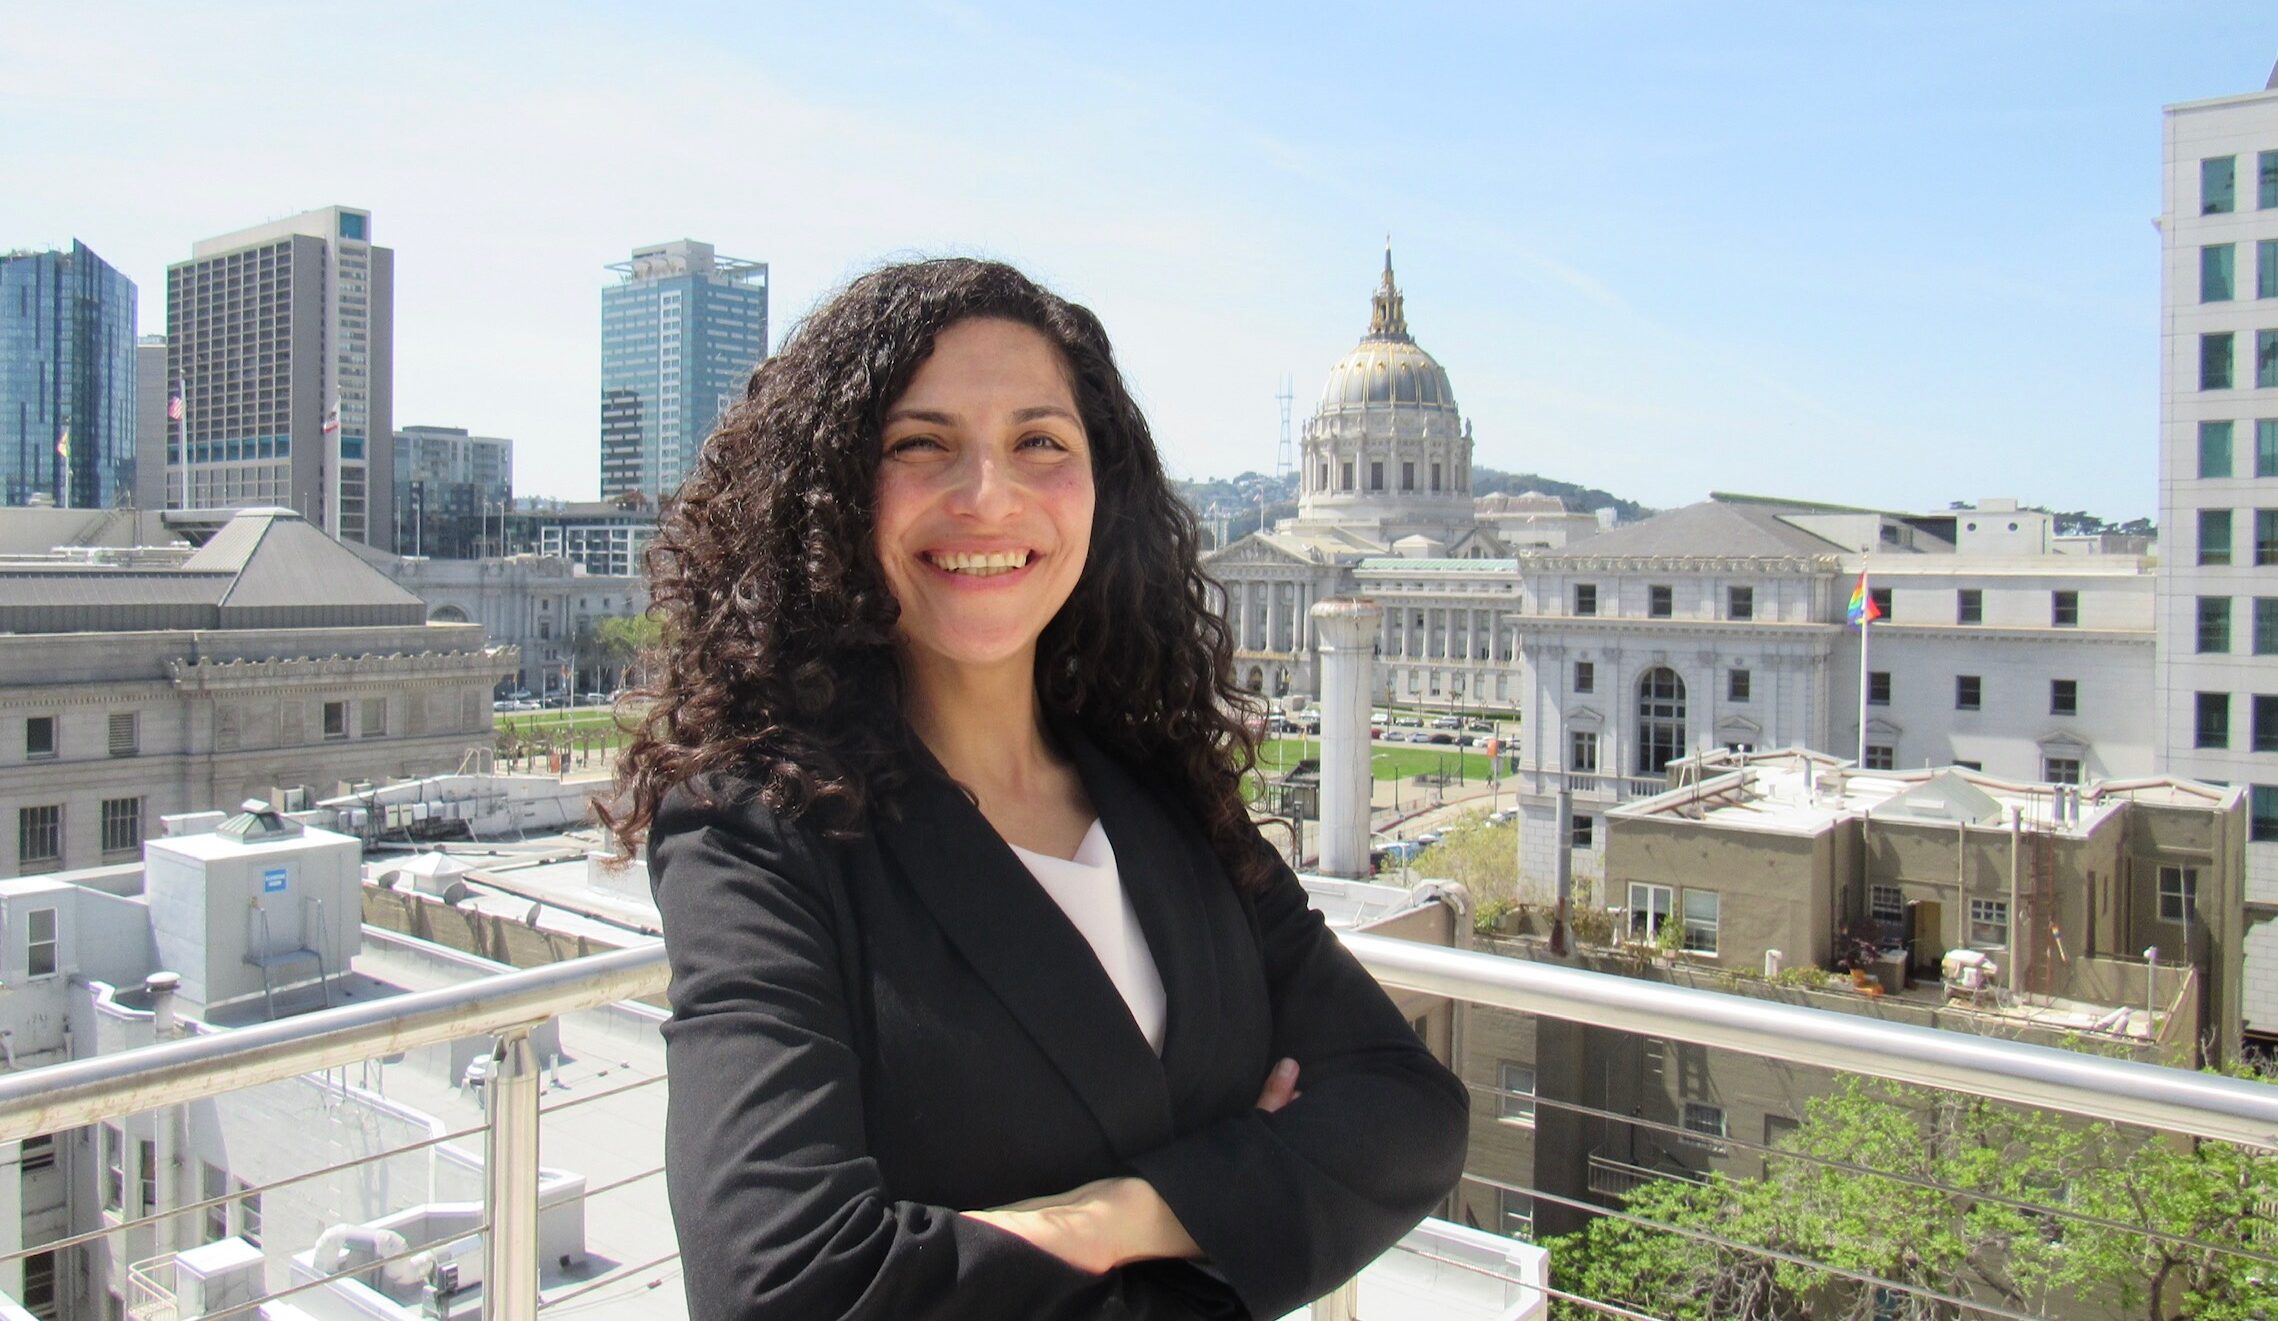 UC Hastings studen Rosamaria Cavalho poses with San Francisco City Hall in the background